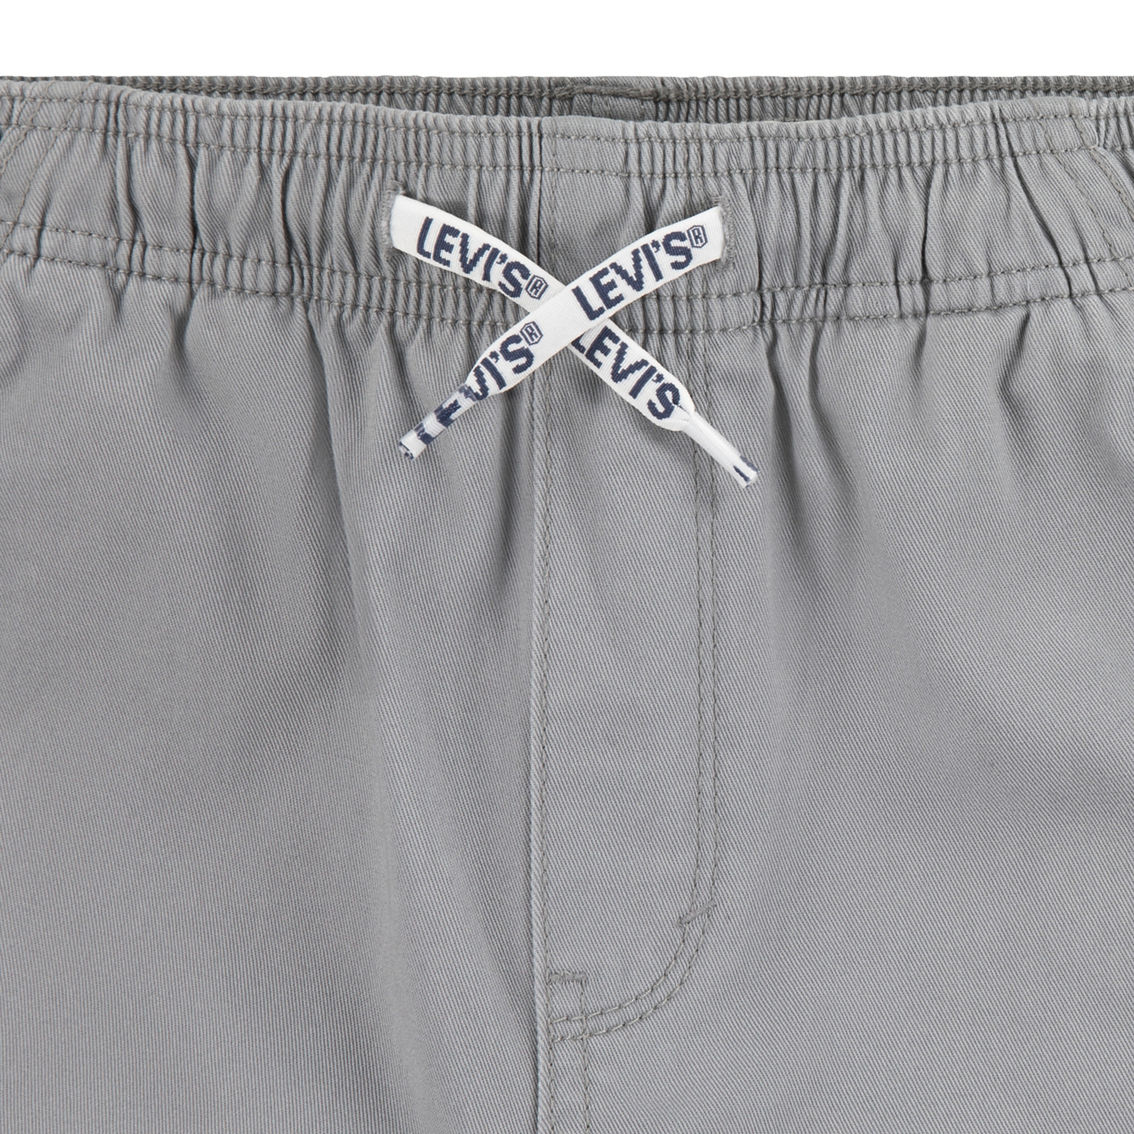 Levi's Boys Pull On Woven Shorts - Image 3 of 5